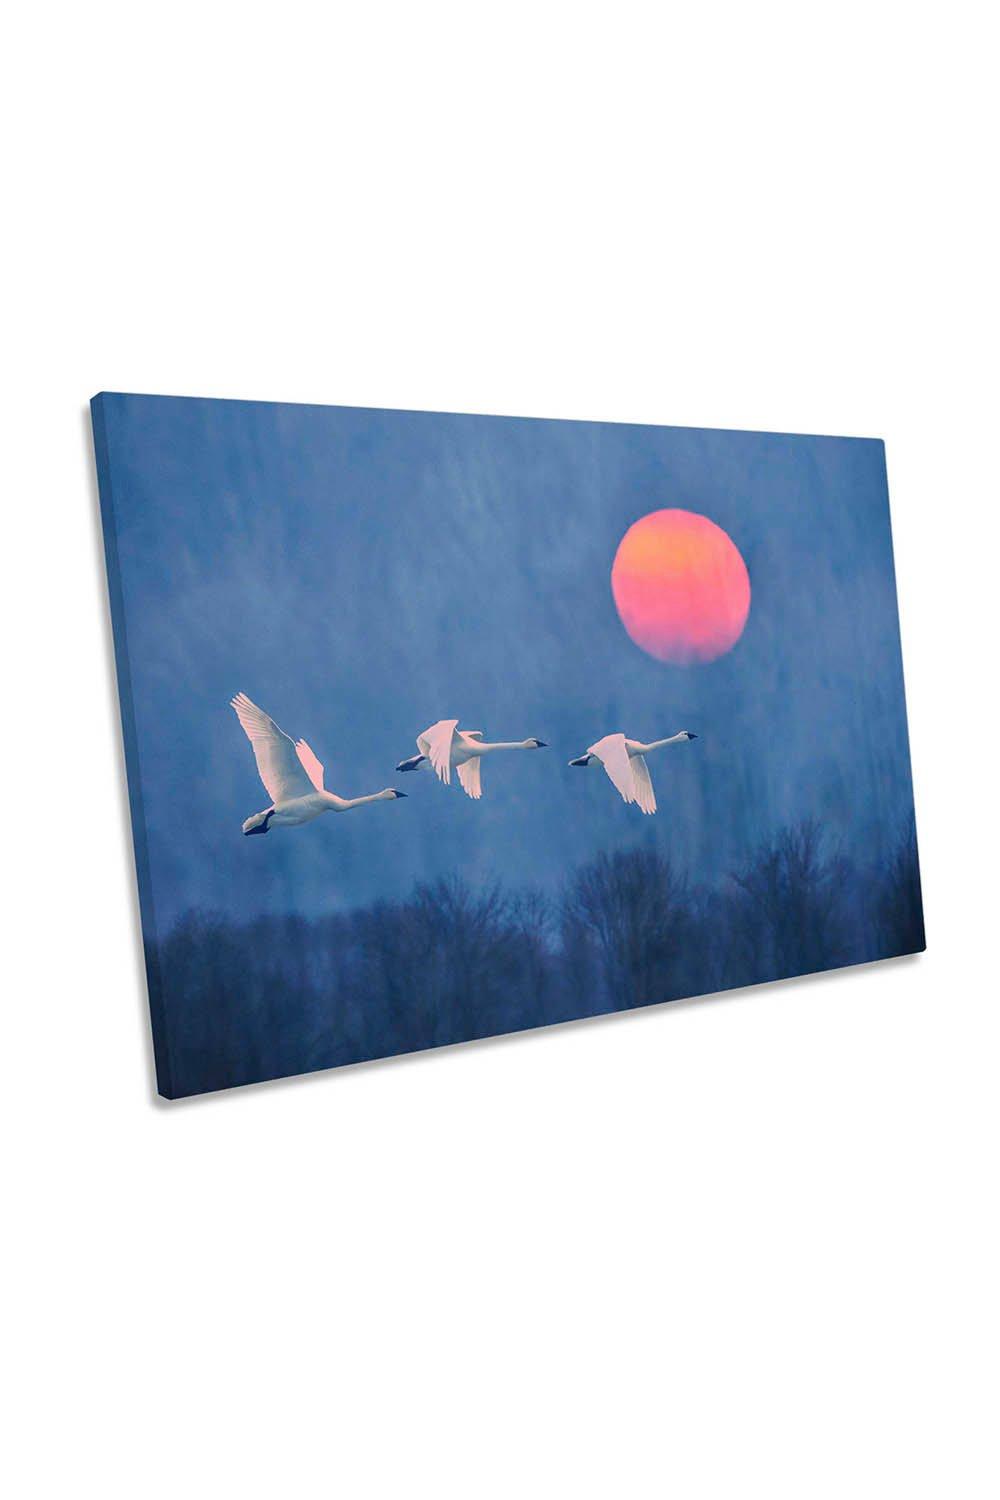 Sunset White Birds in Flight Canvas Wall Art Picture Print